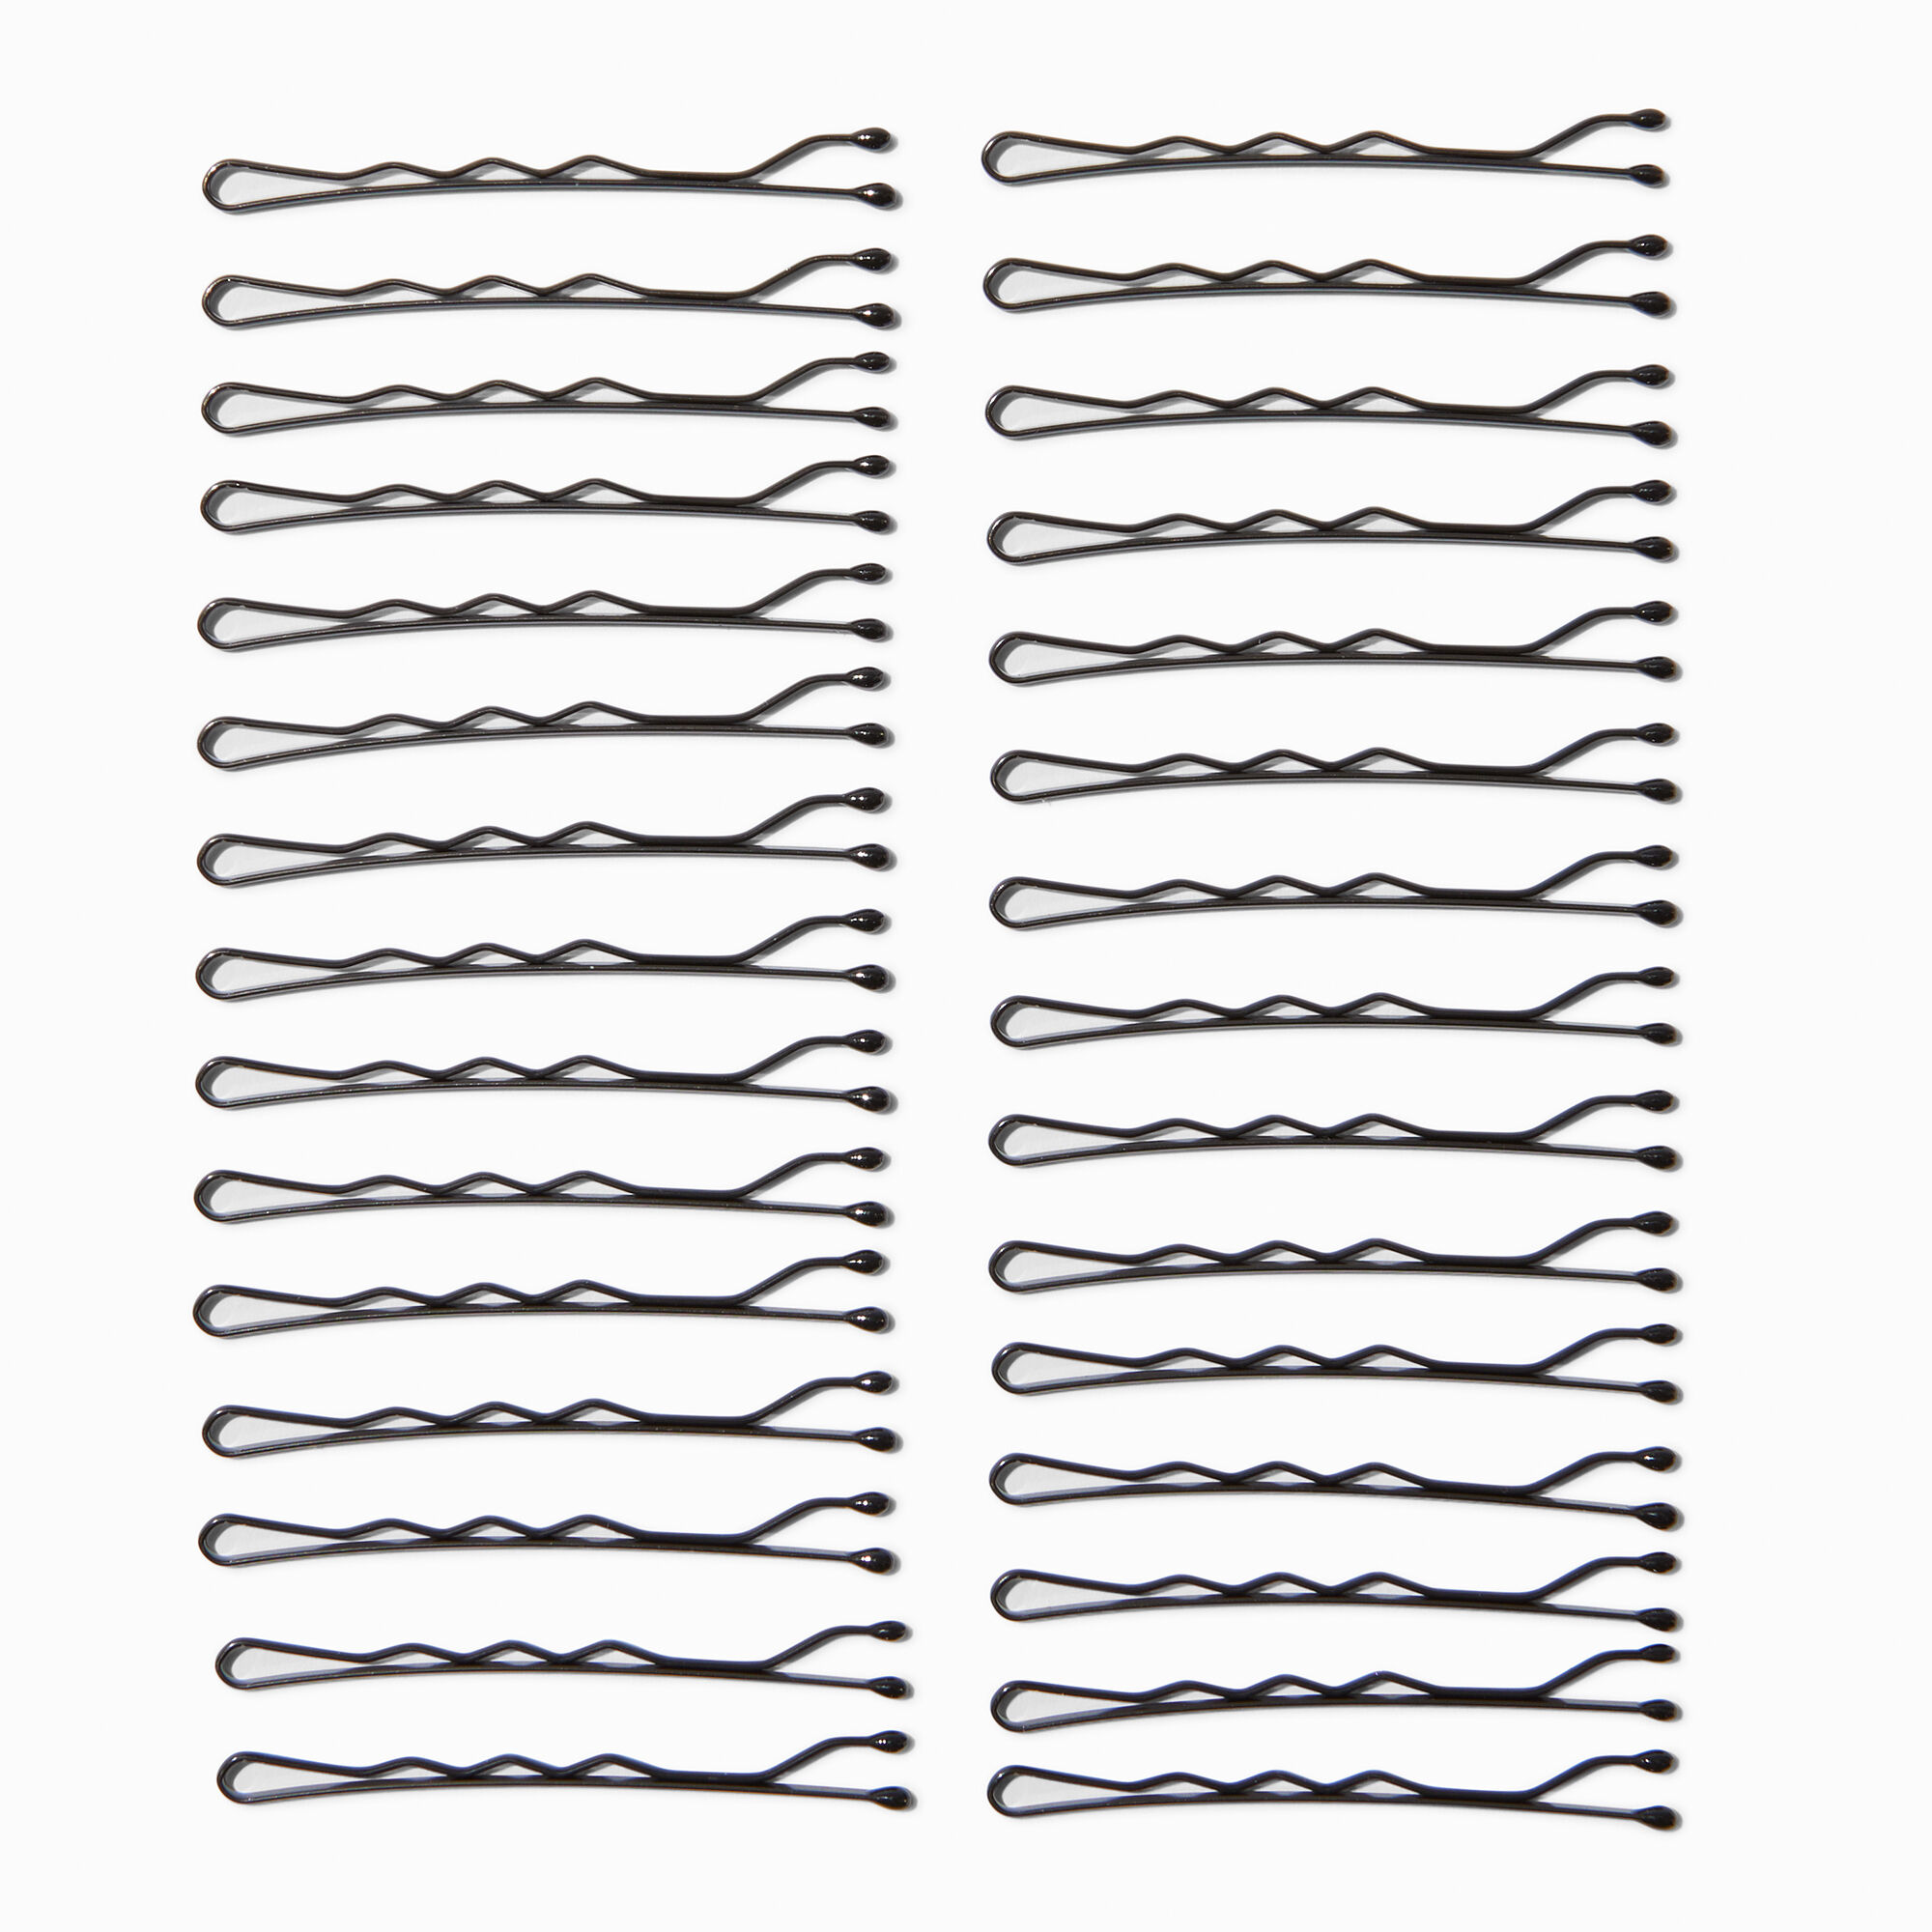 View Claires Basic Bobby Pins Black 30 Pack information